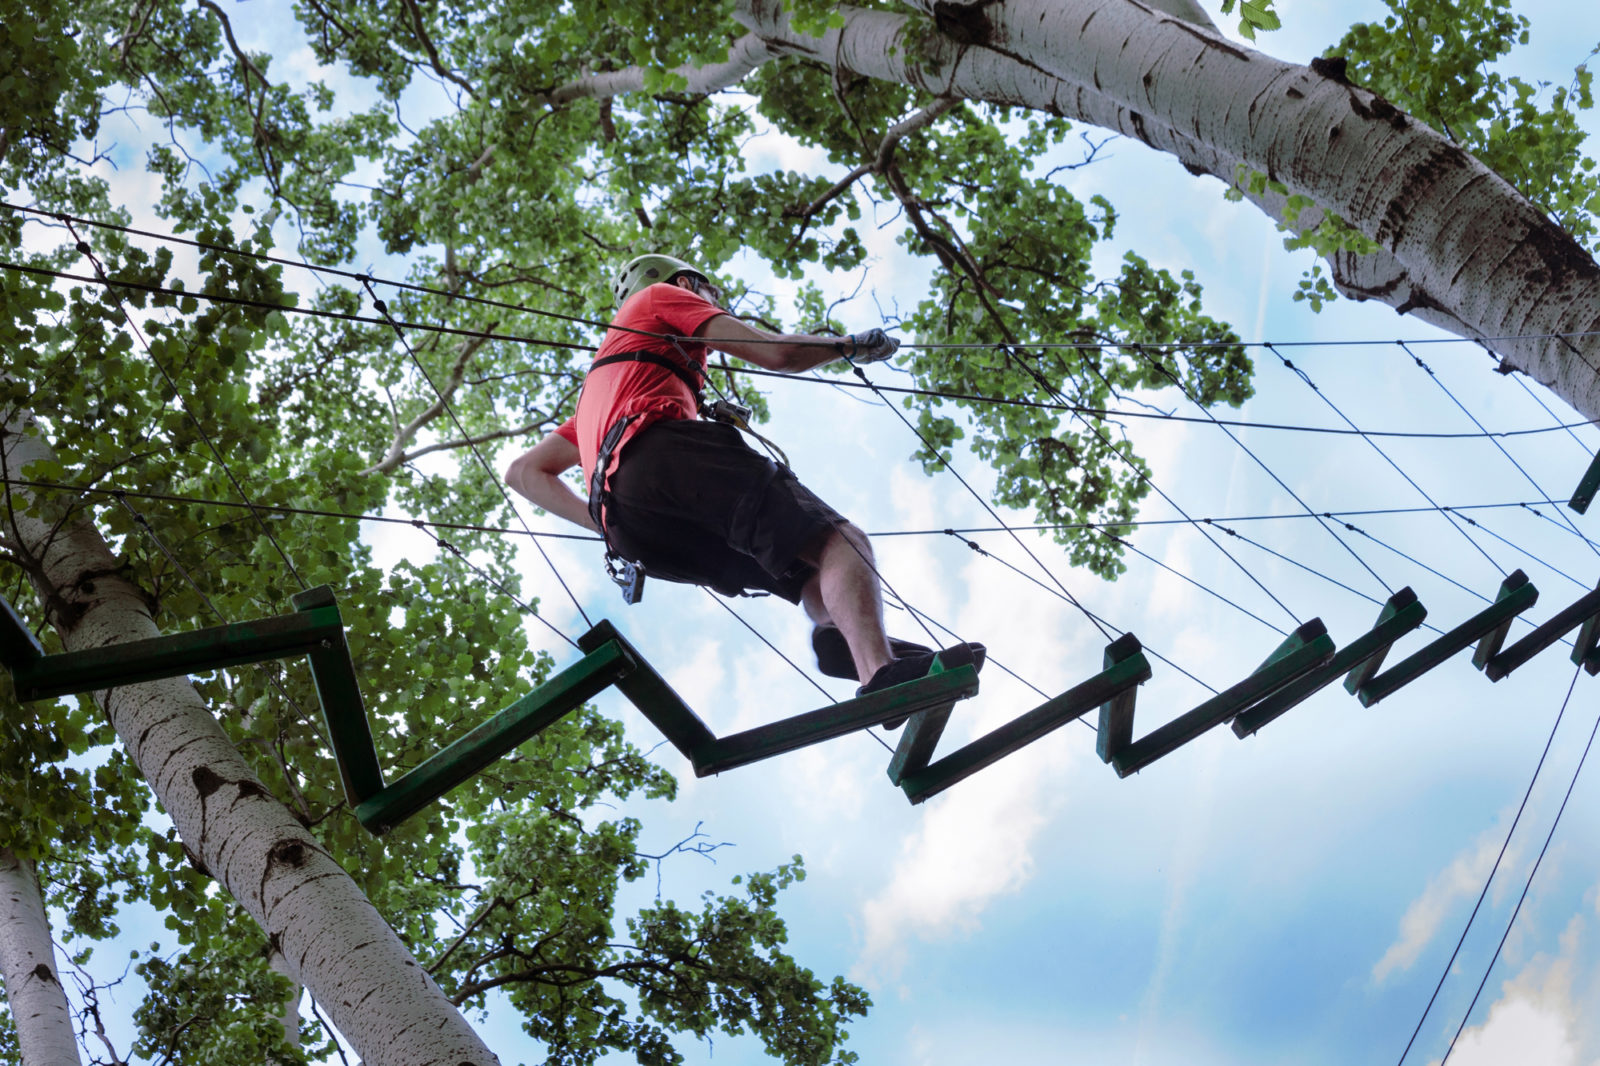 Tree-Top Course theme for events